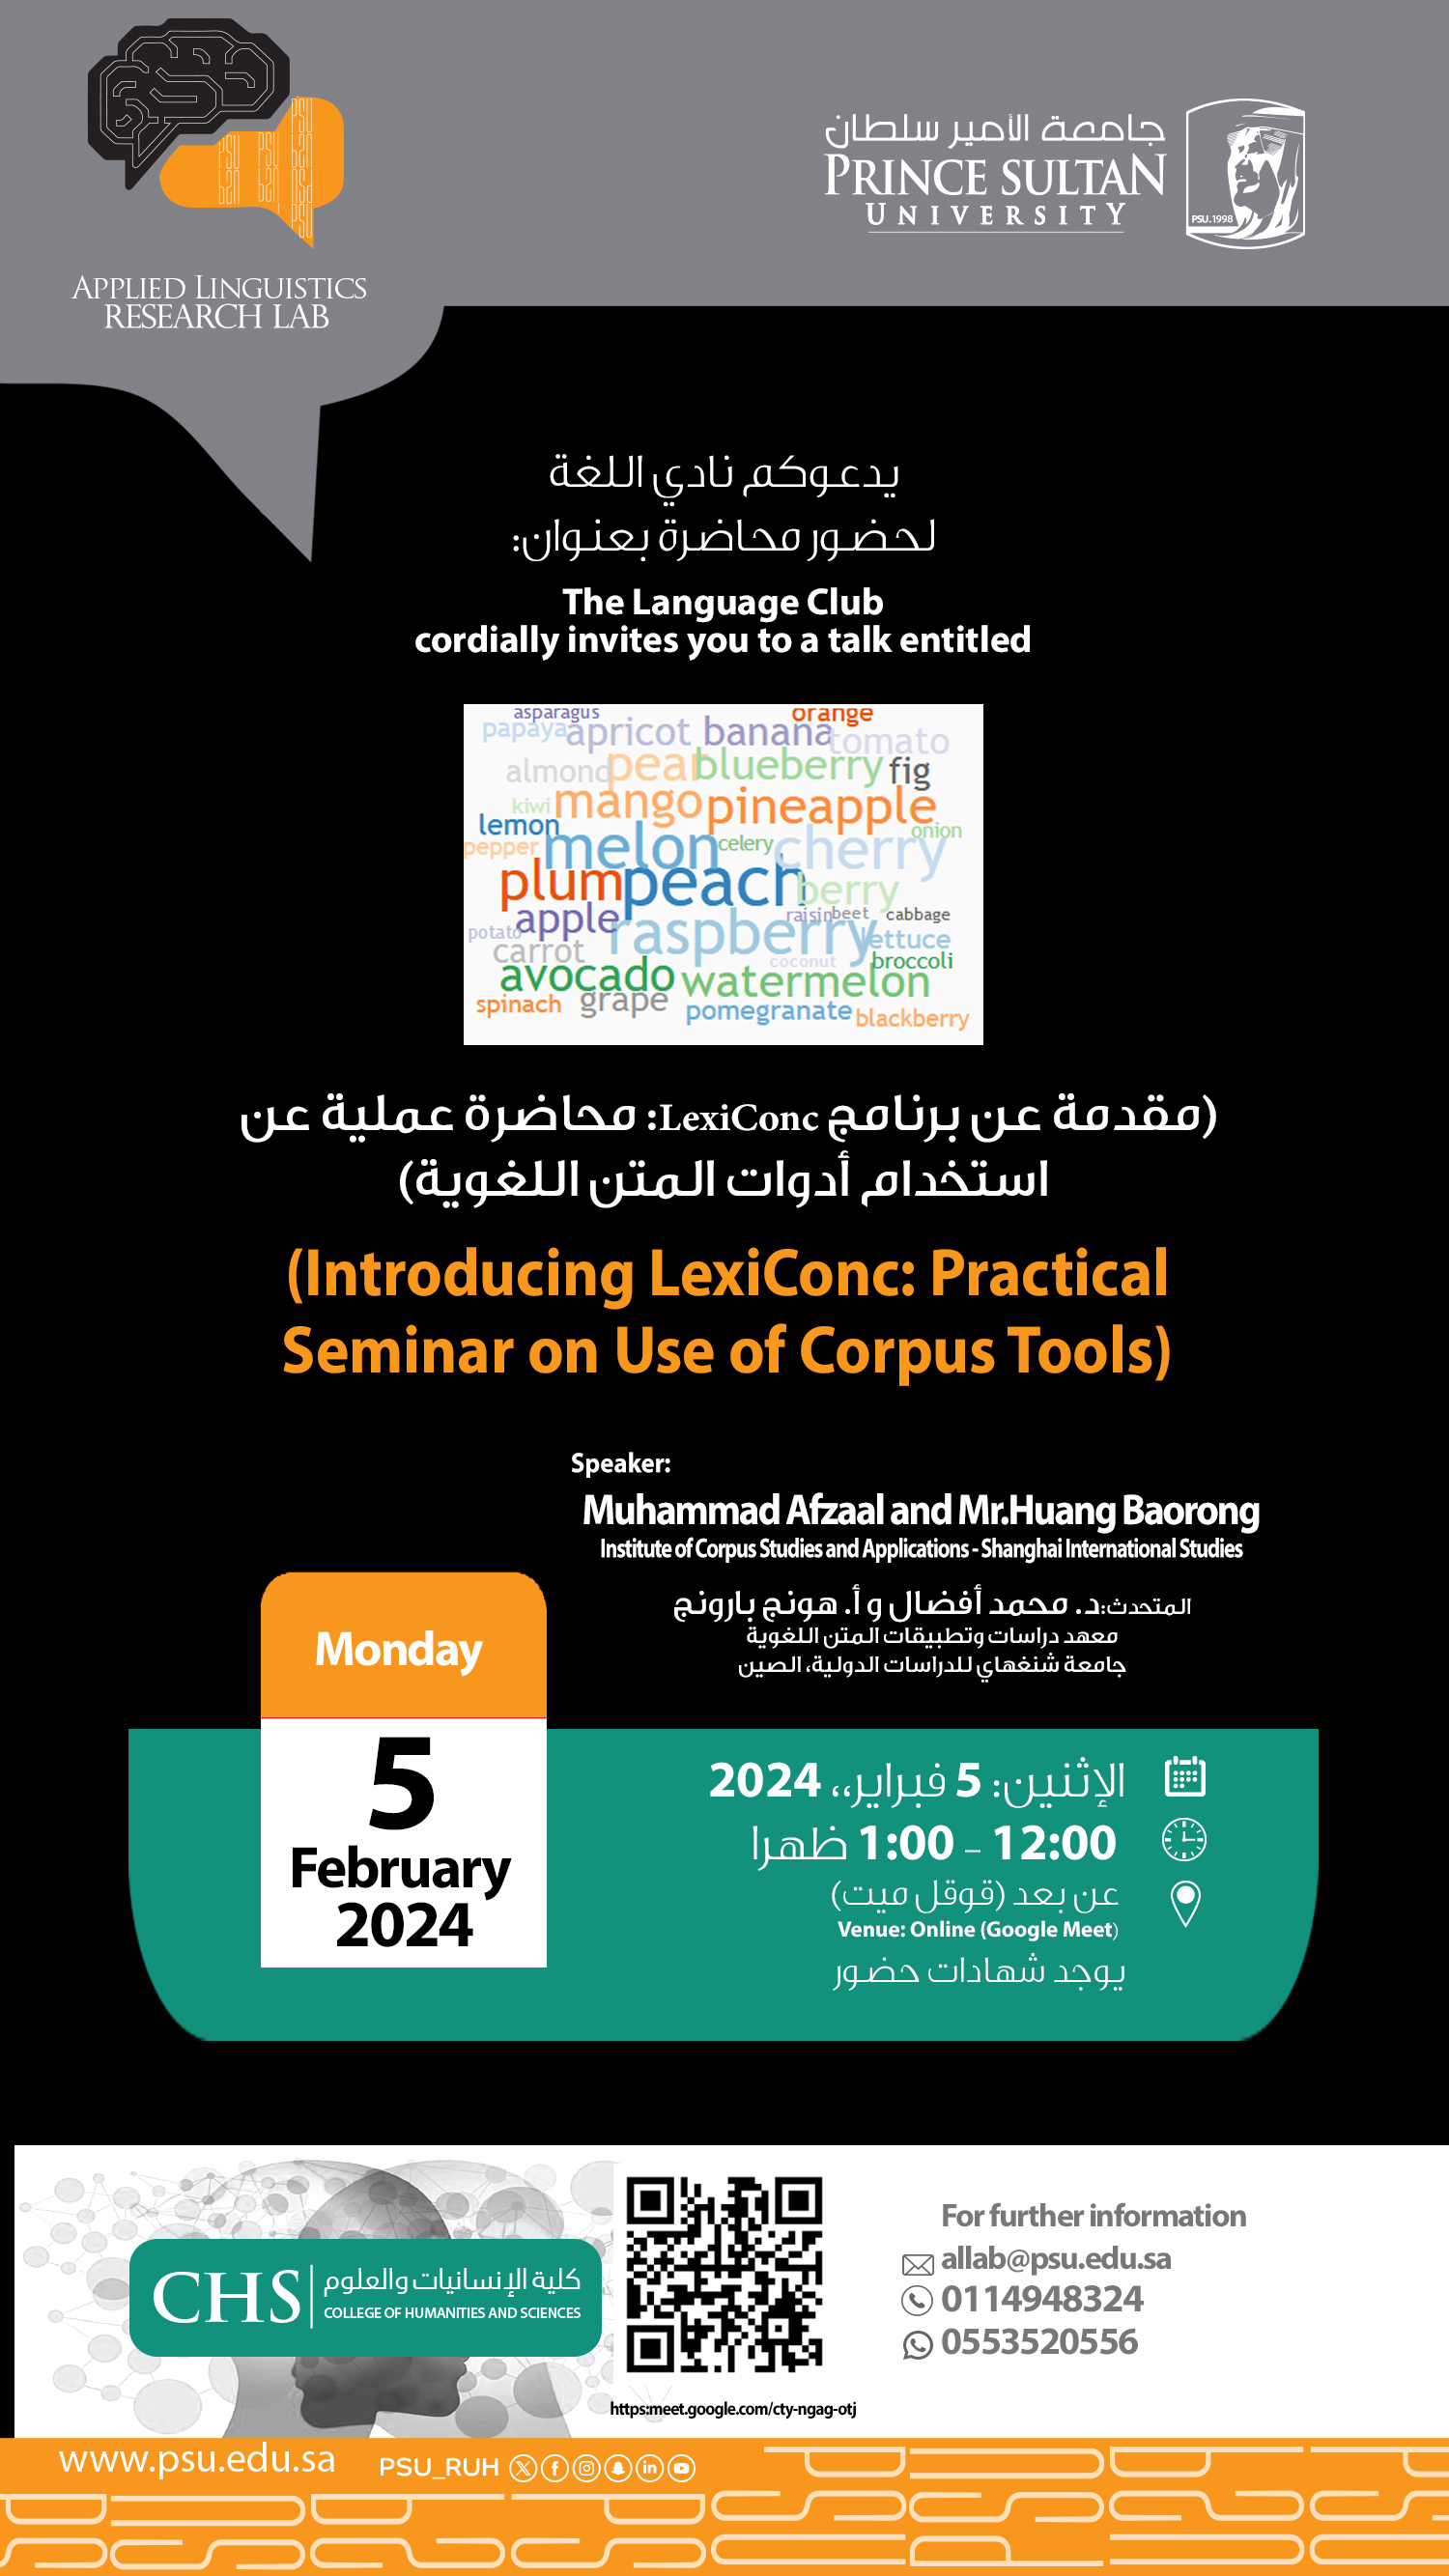 Introducing LexiConc: Practical Seminar on Use of Corpus Tools